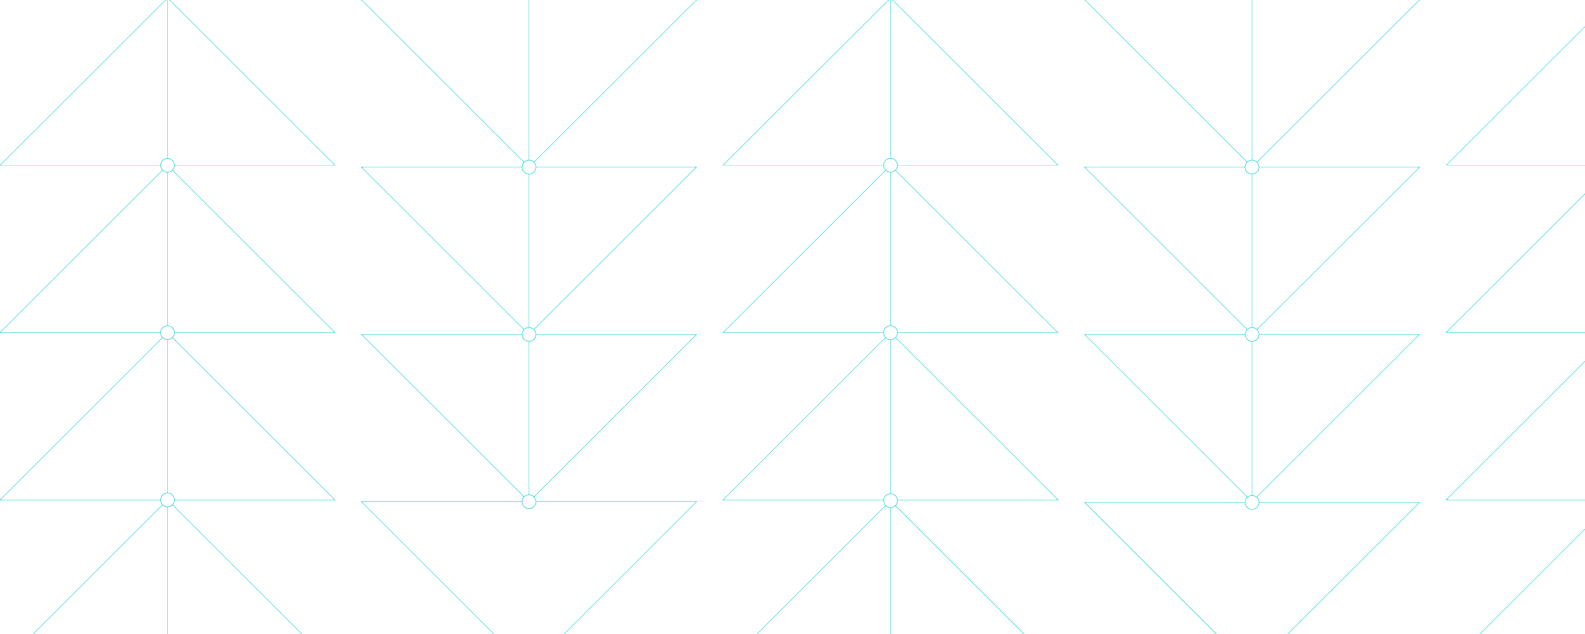 Illustration showing thin blue lines forming delicate triangular patterns